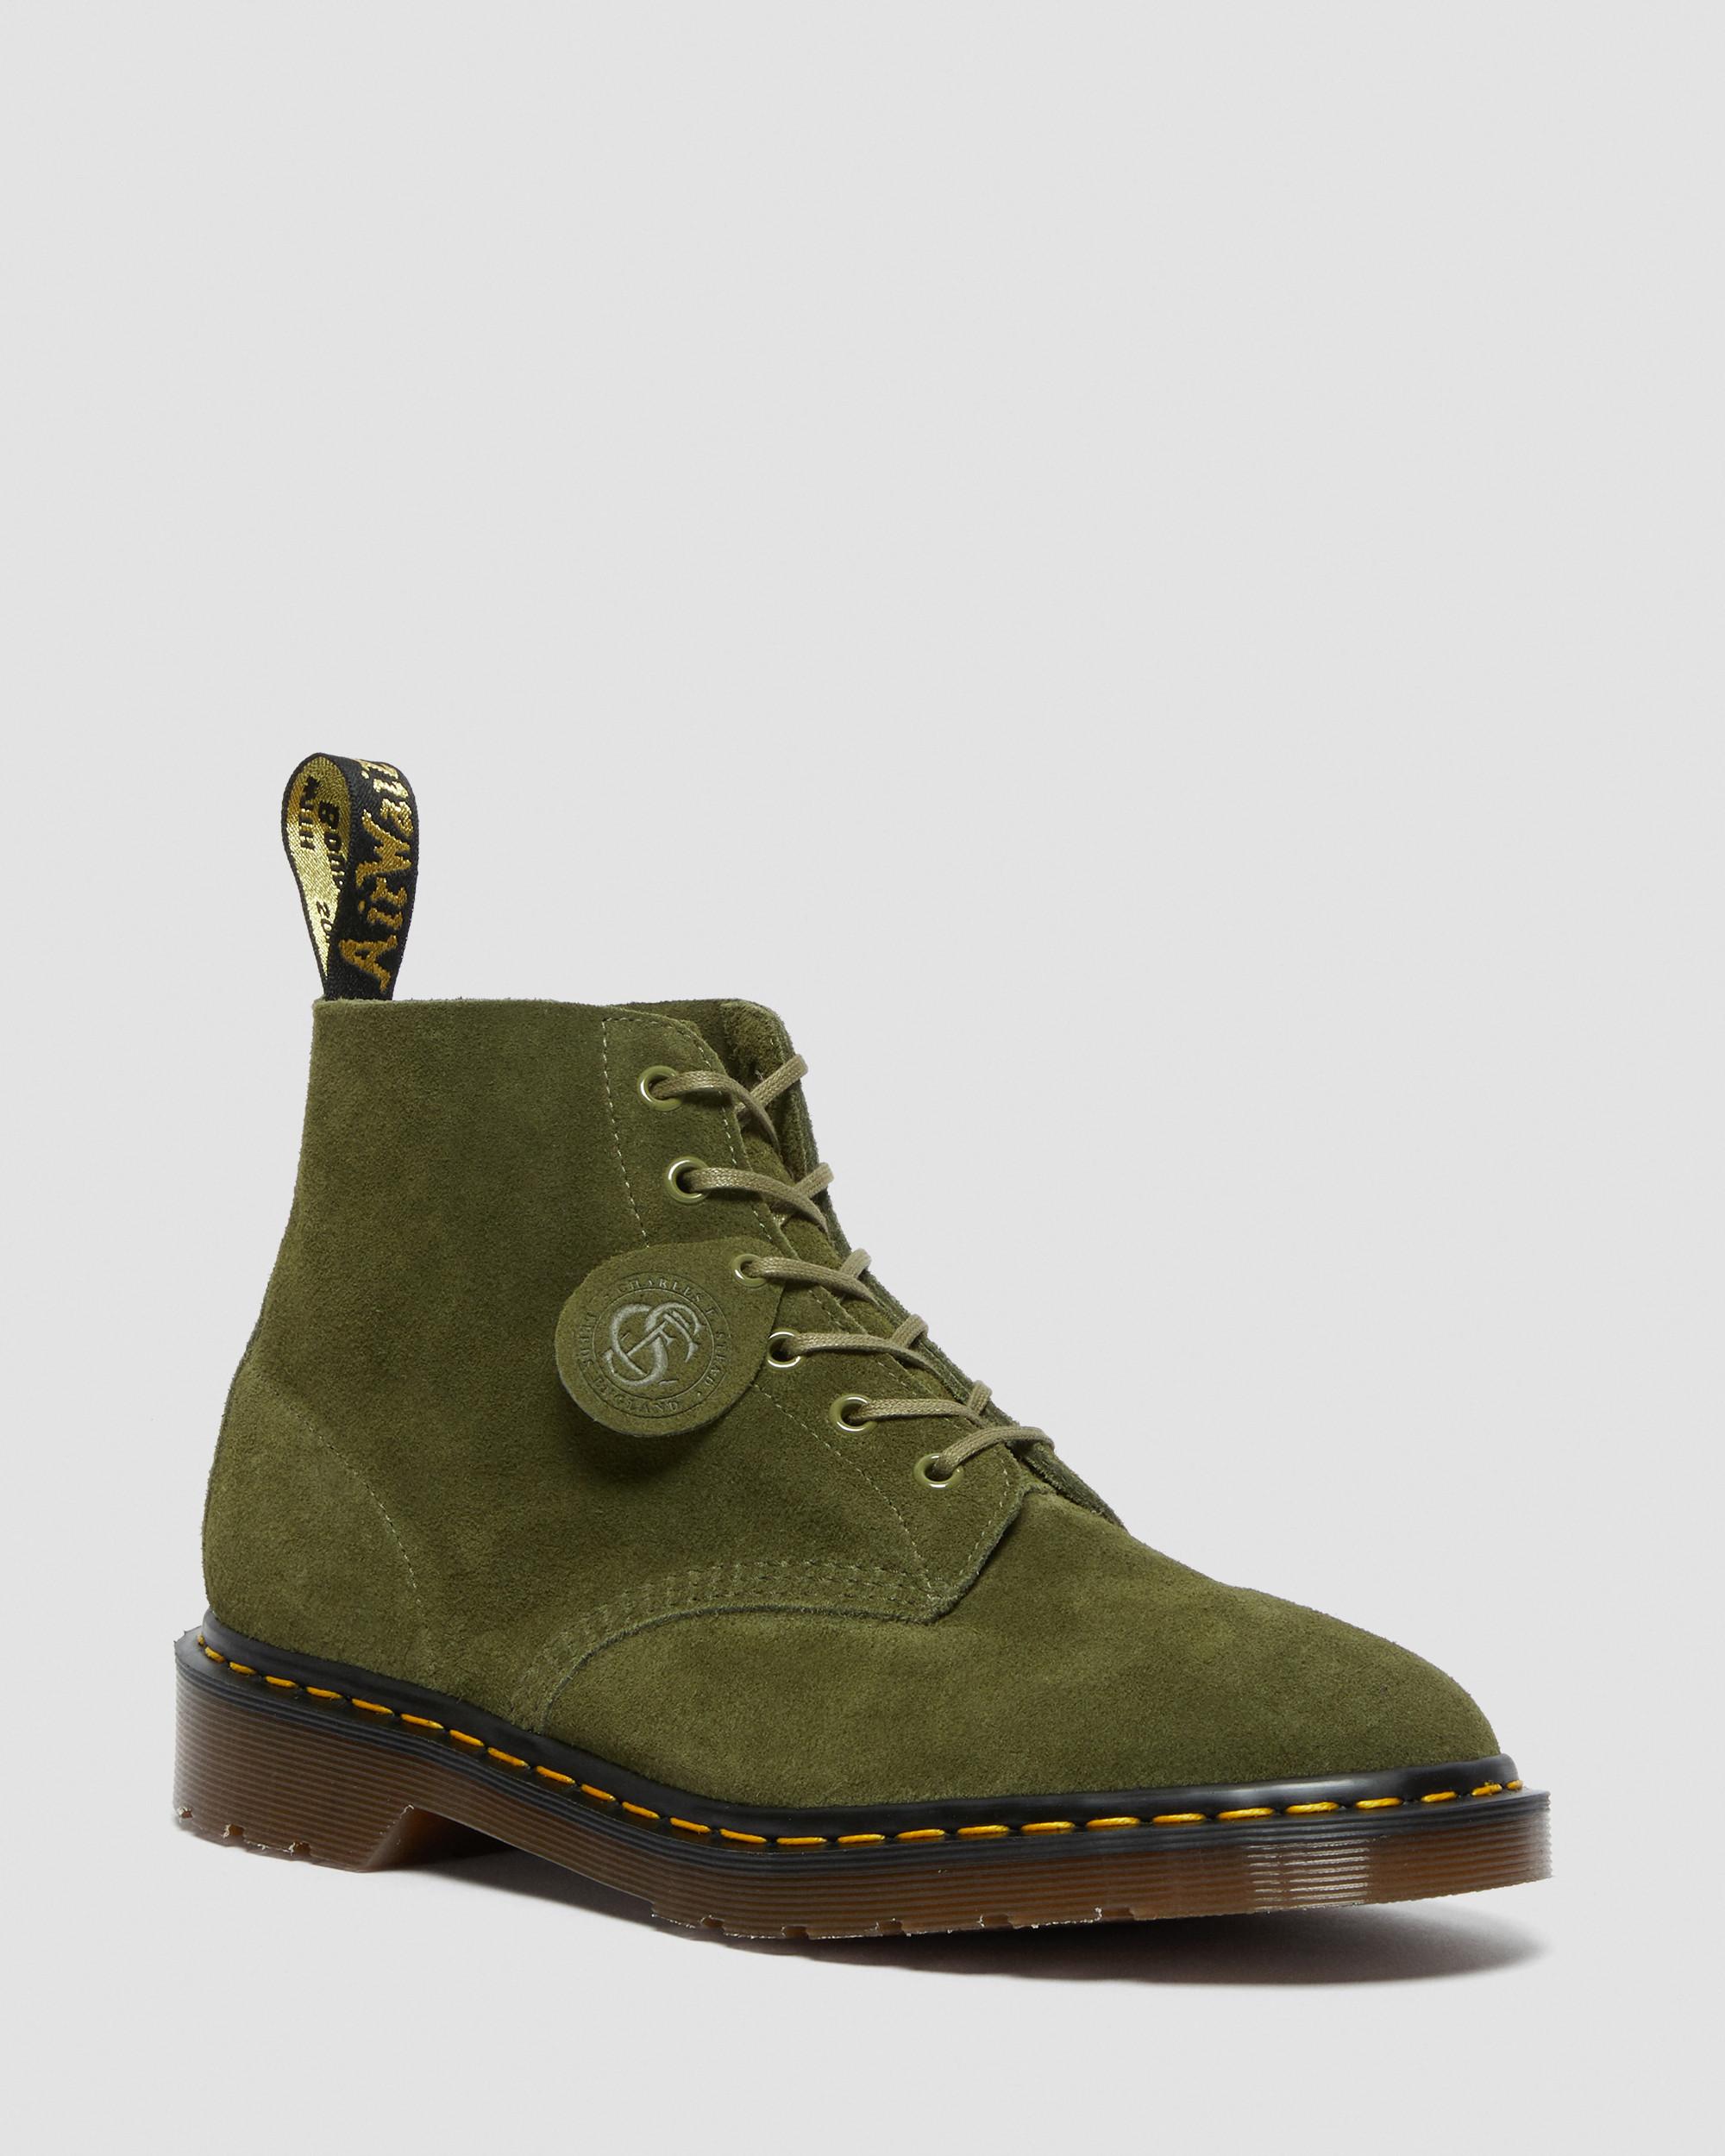 DR MARTENS 101 Made in England Suede Ankle Boots